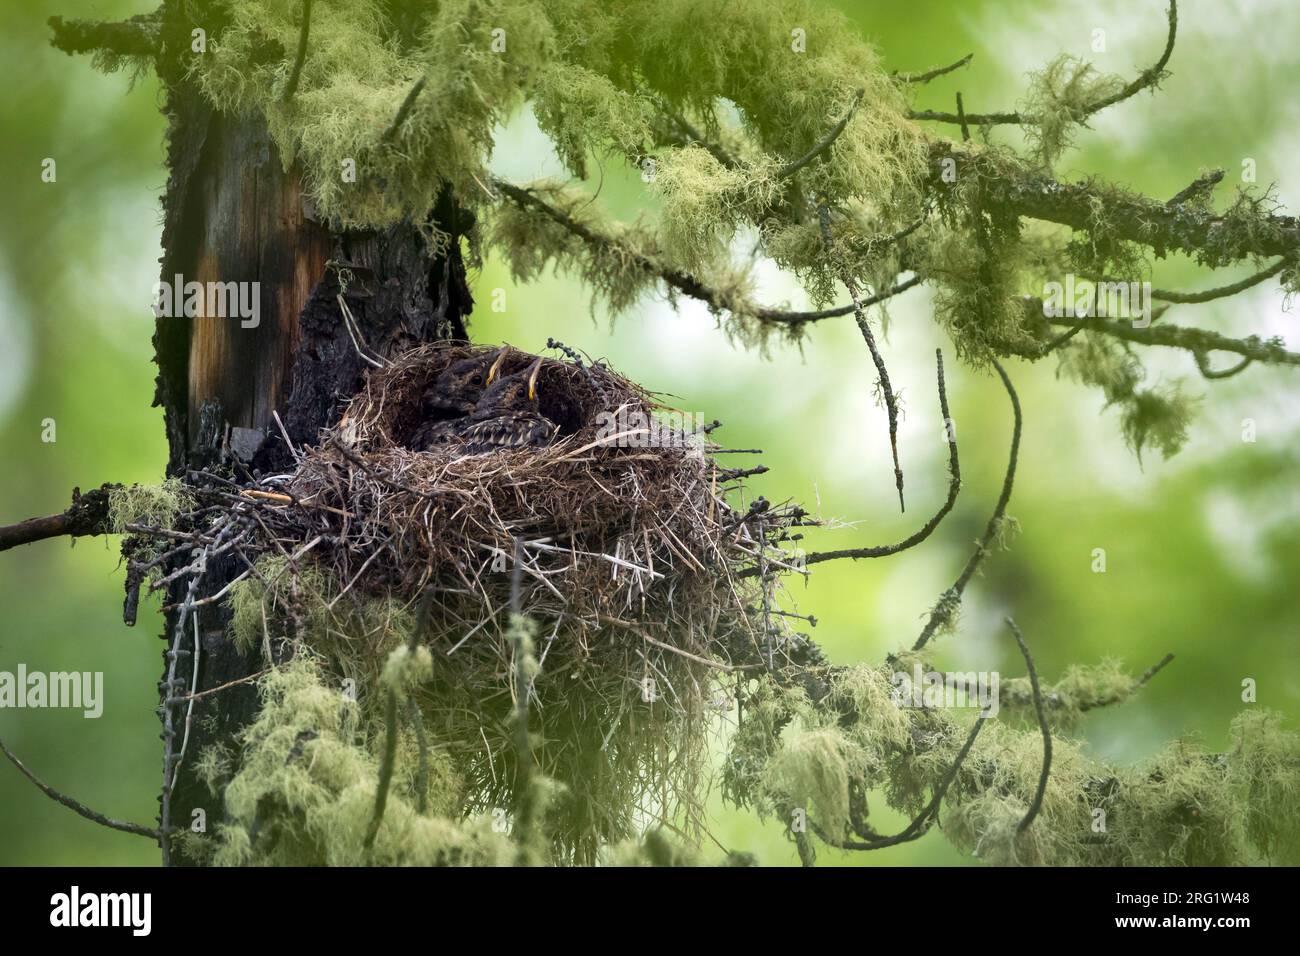 Red-throated Thrush, Turdus ruficollis, Russia (Baikal), nest with offspring Stock Photo